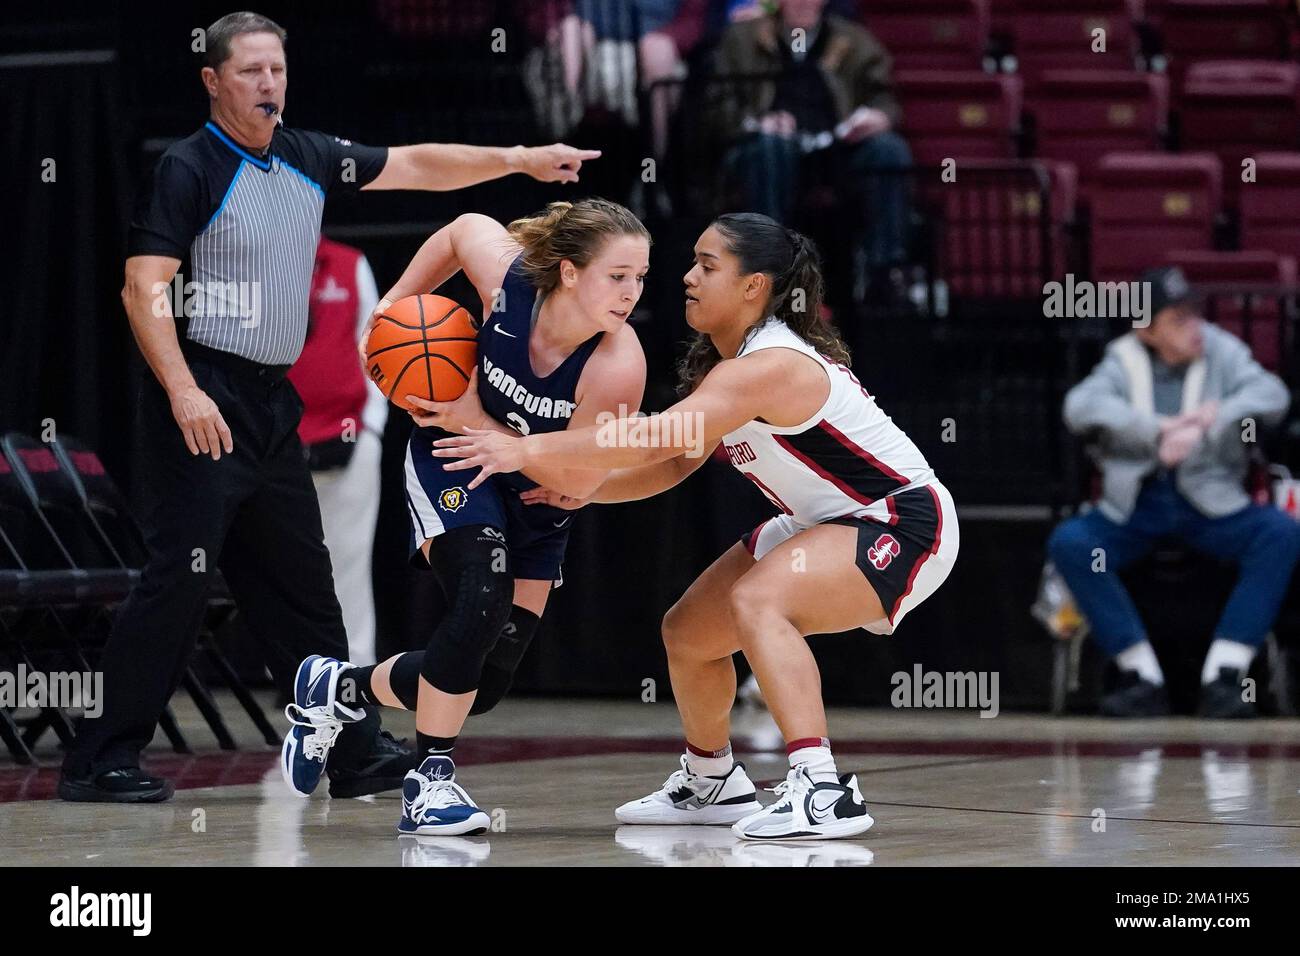 Stanford guard Talana Lepolo, right, defends against Vanguard guard